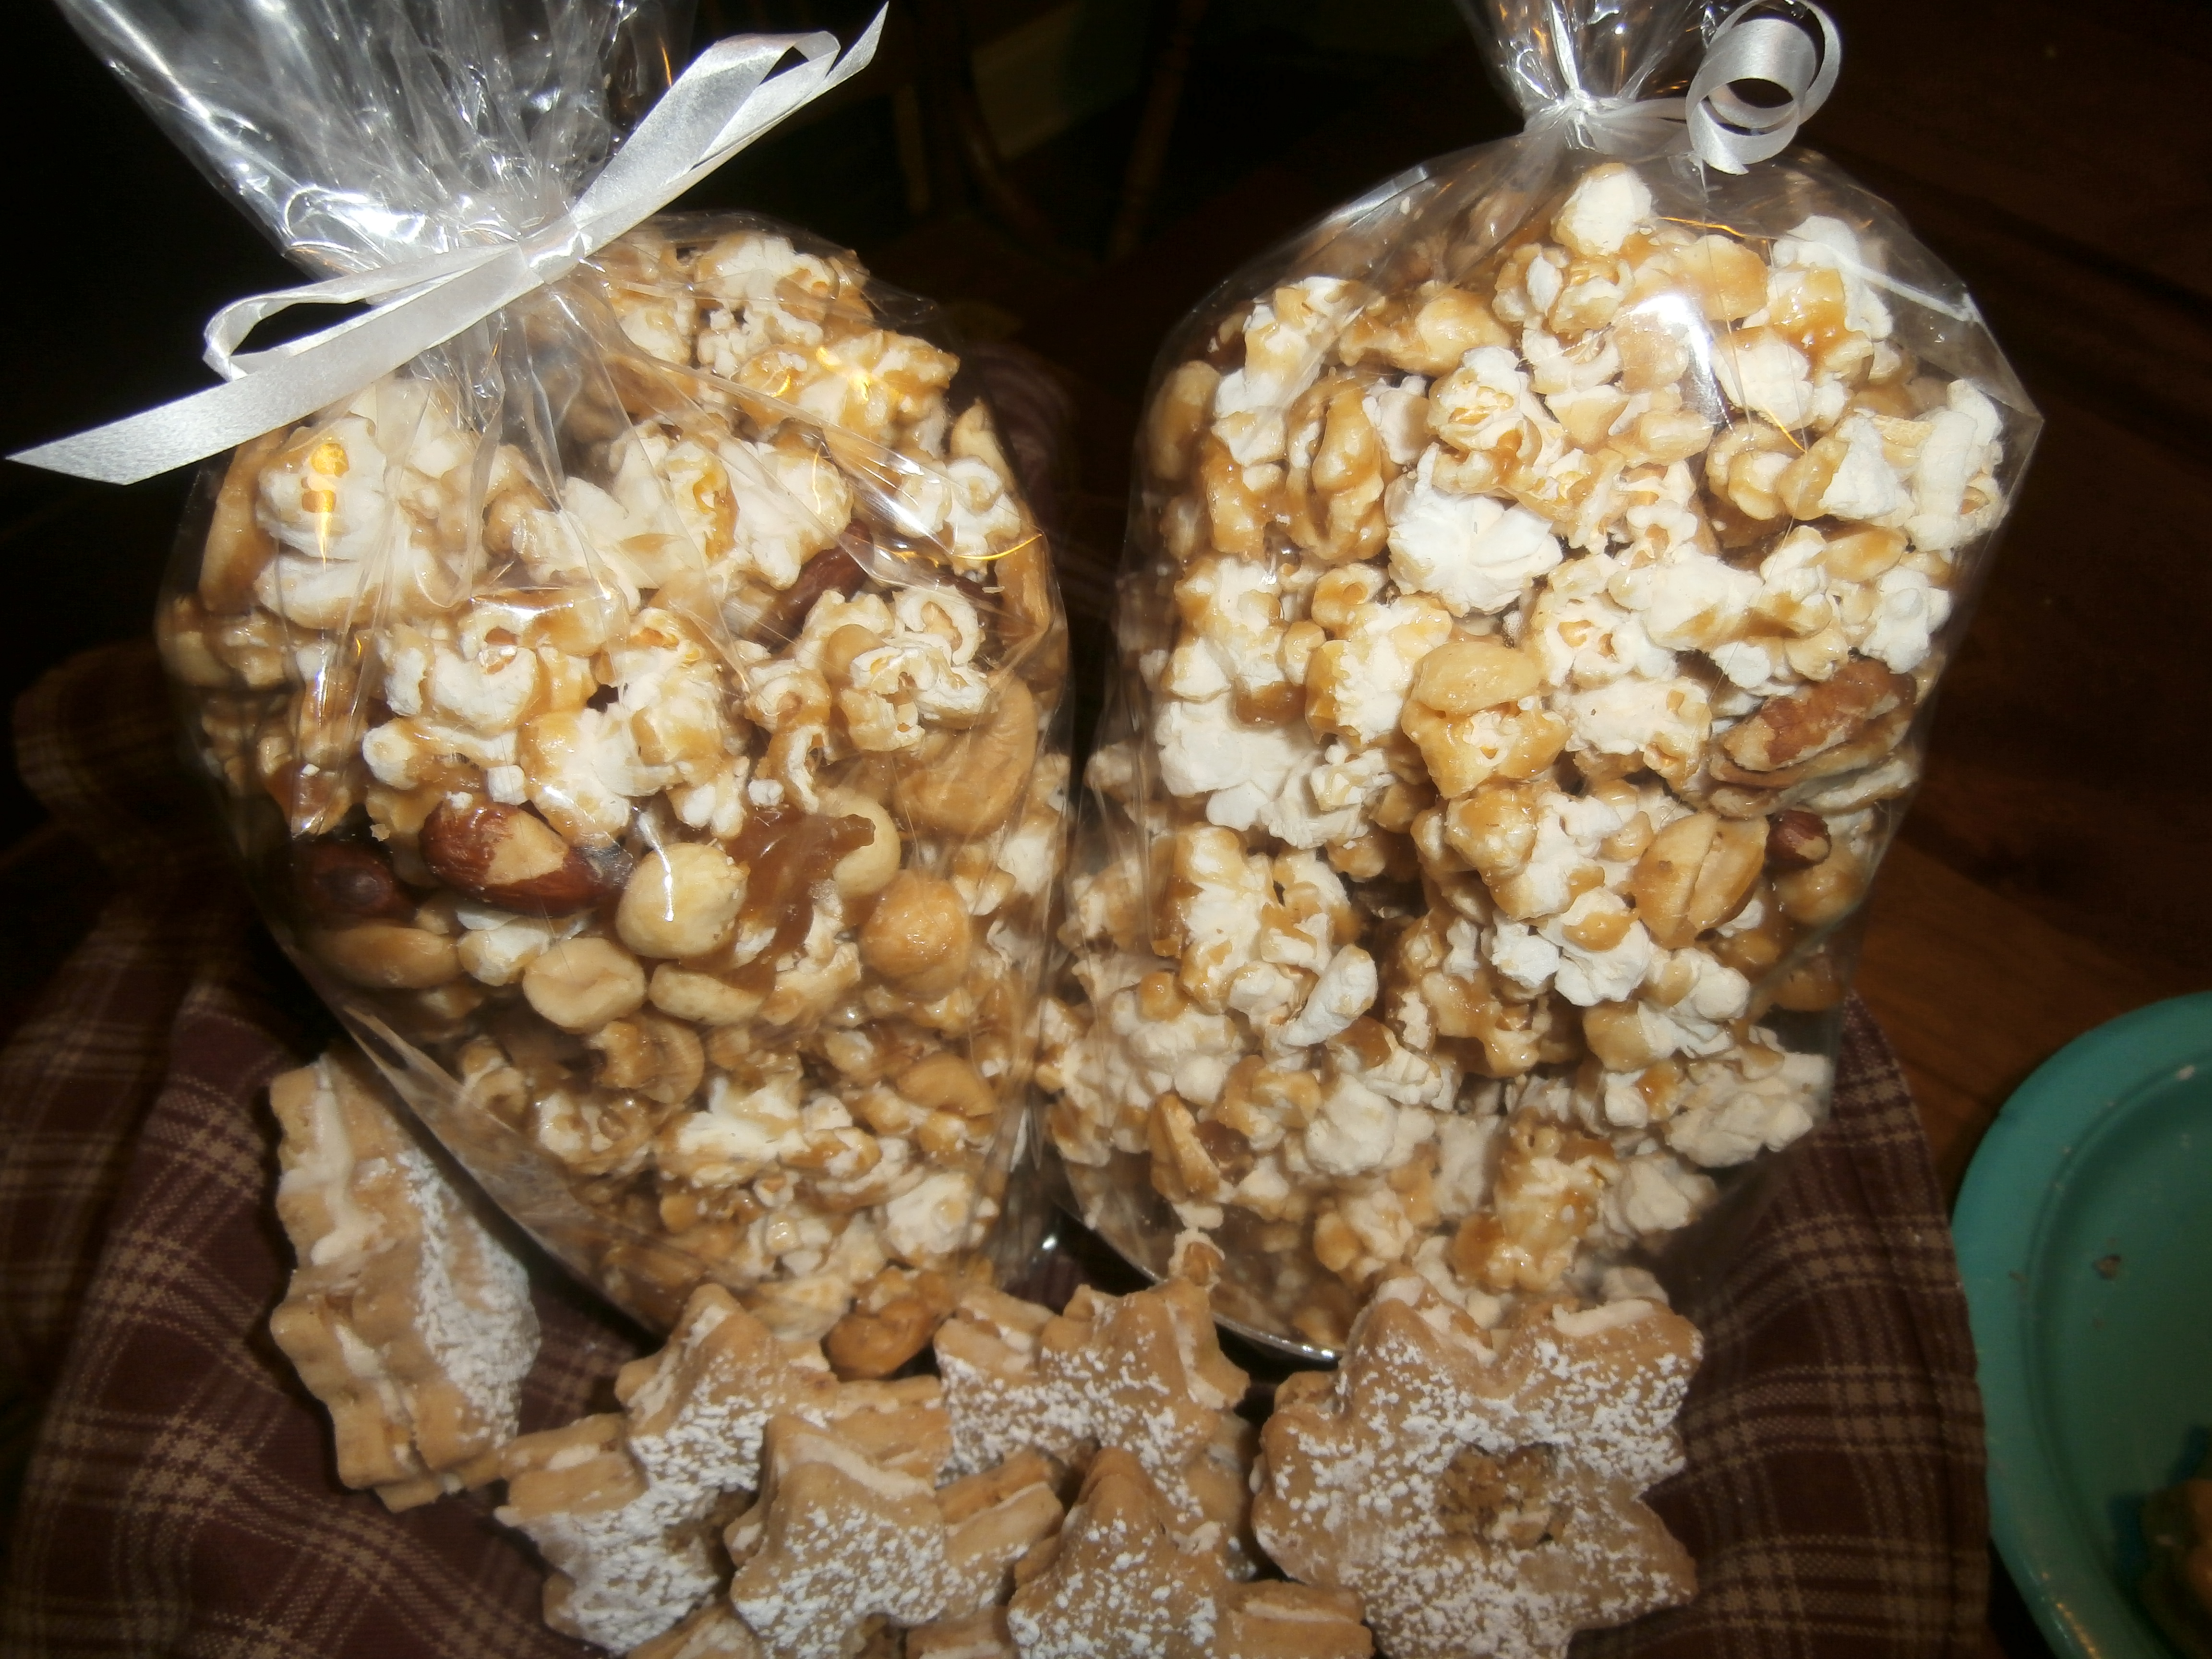 My other entries: maple glazed popcorn and shortbread crunch cookies